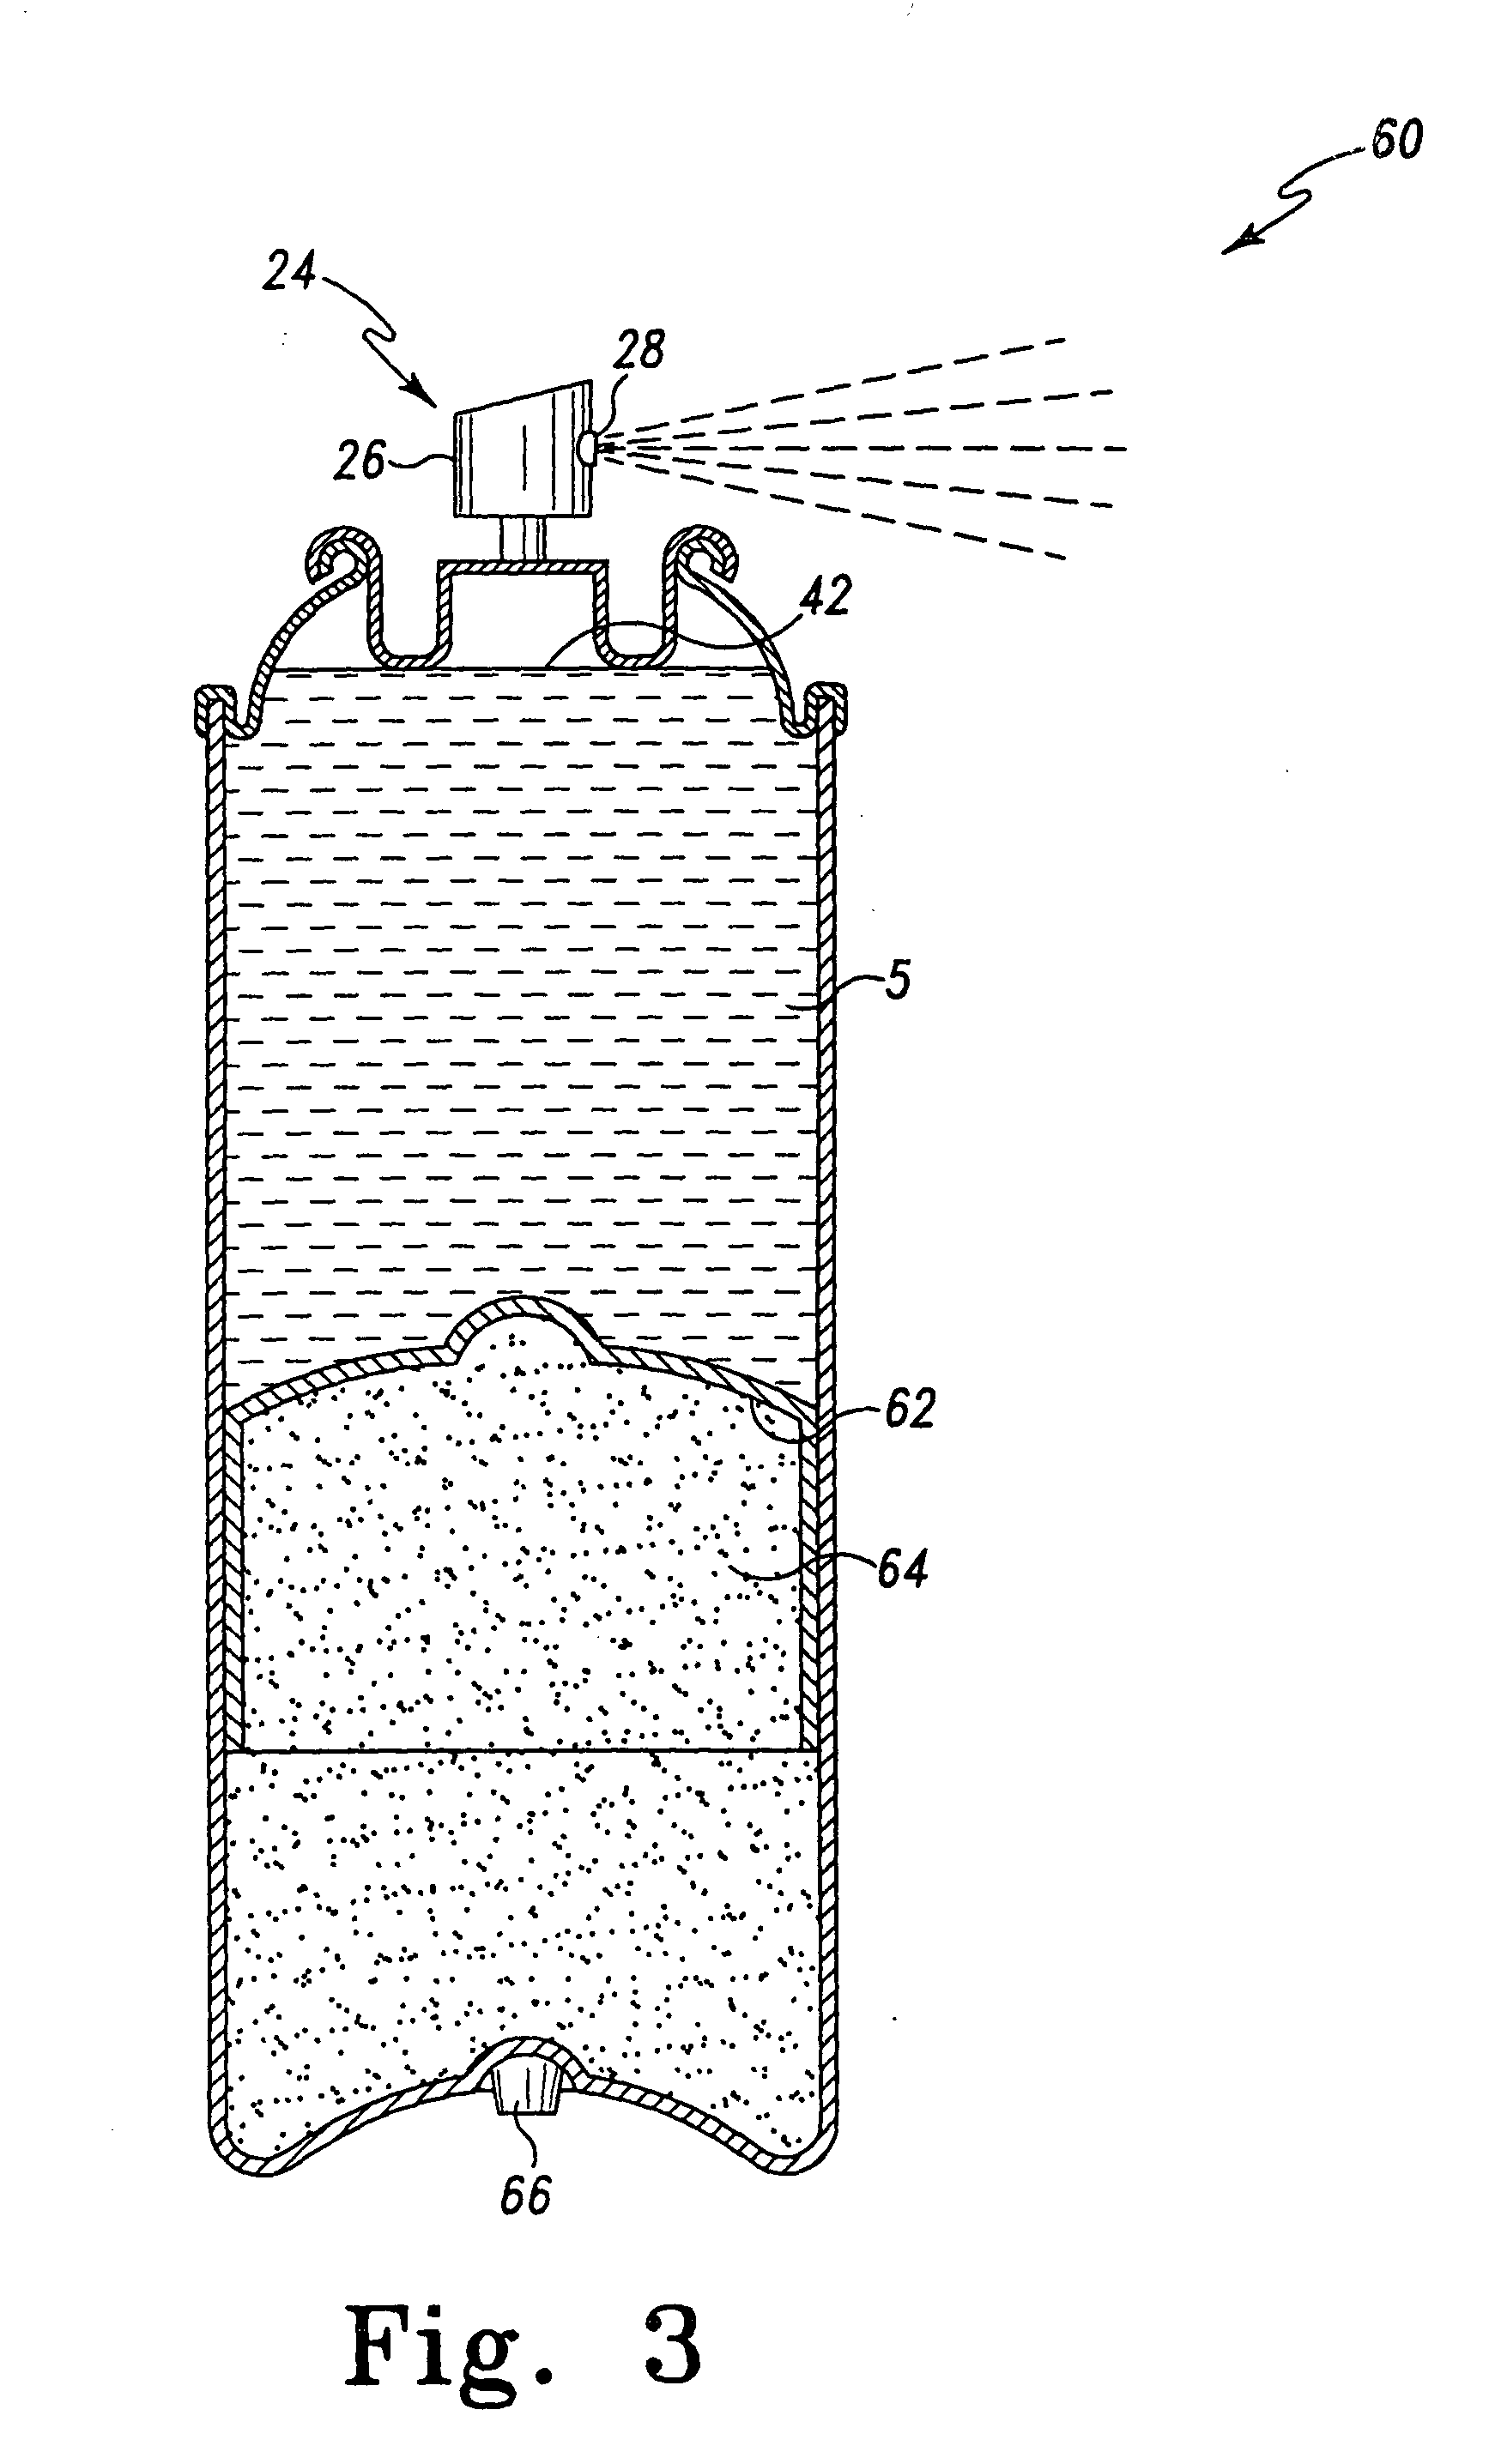 Methods, compositions and systems for the prevention and treatment of diaper rash